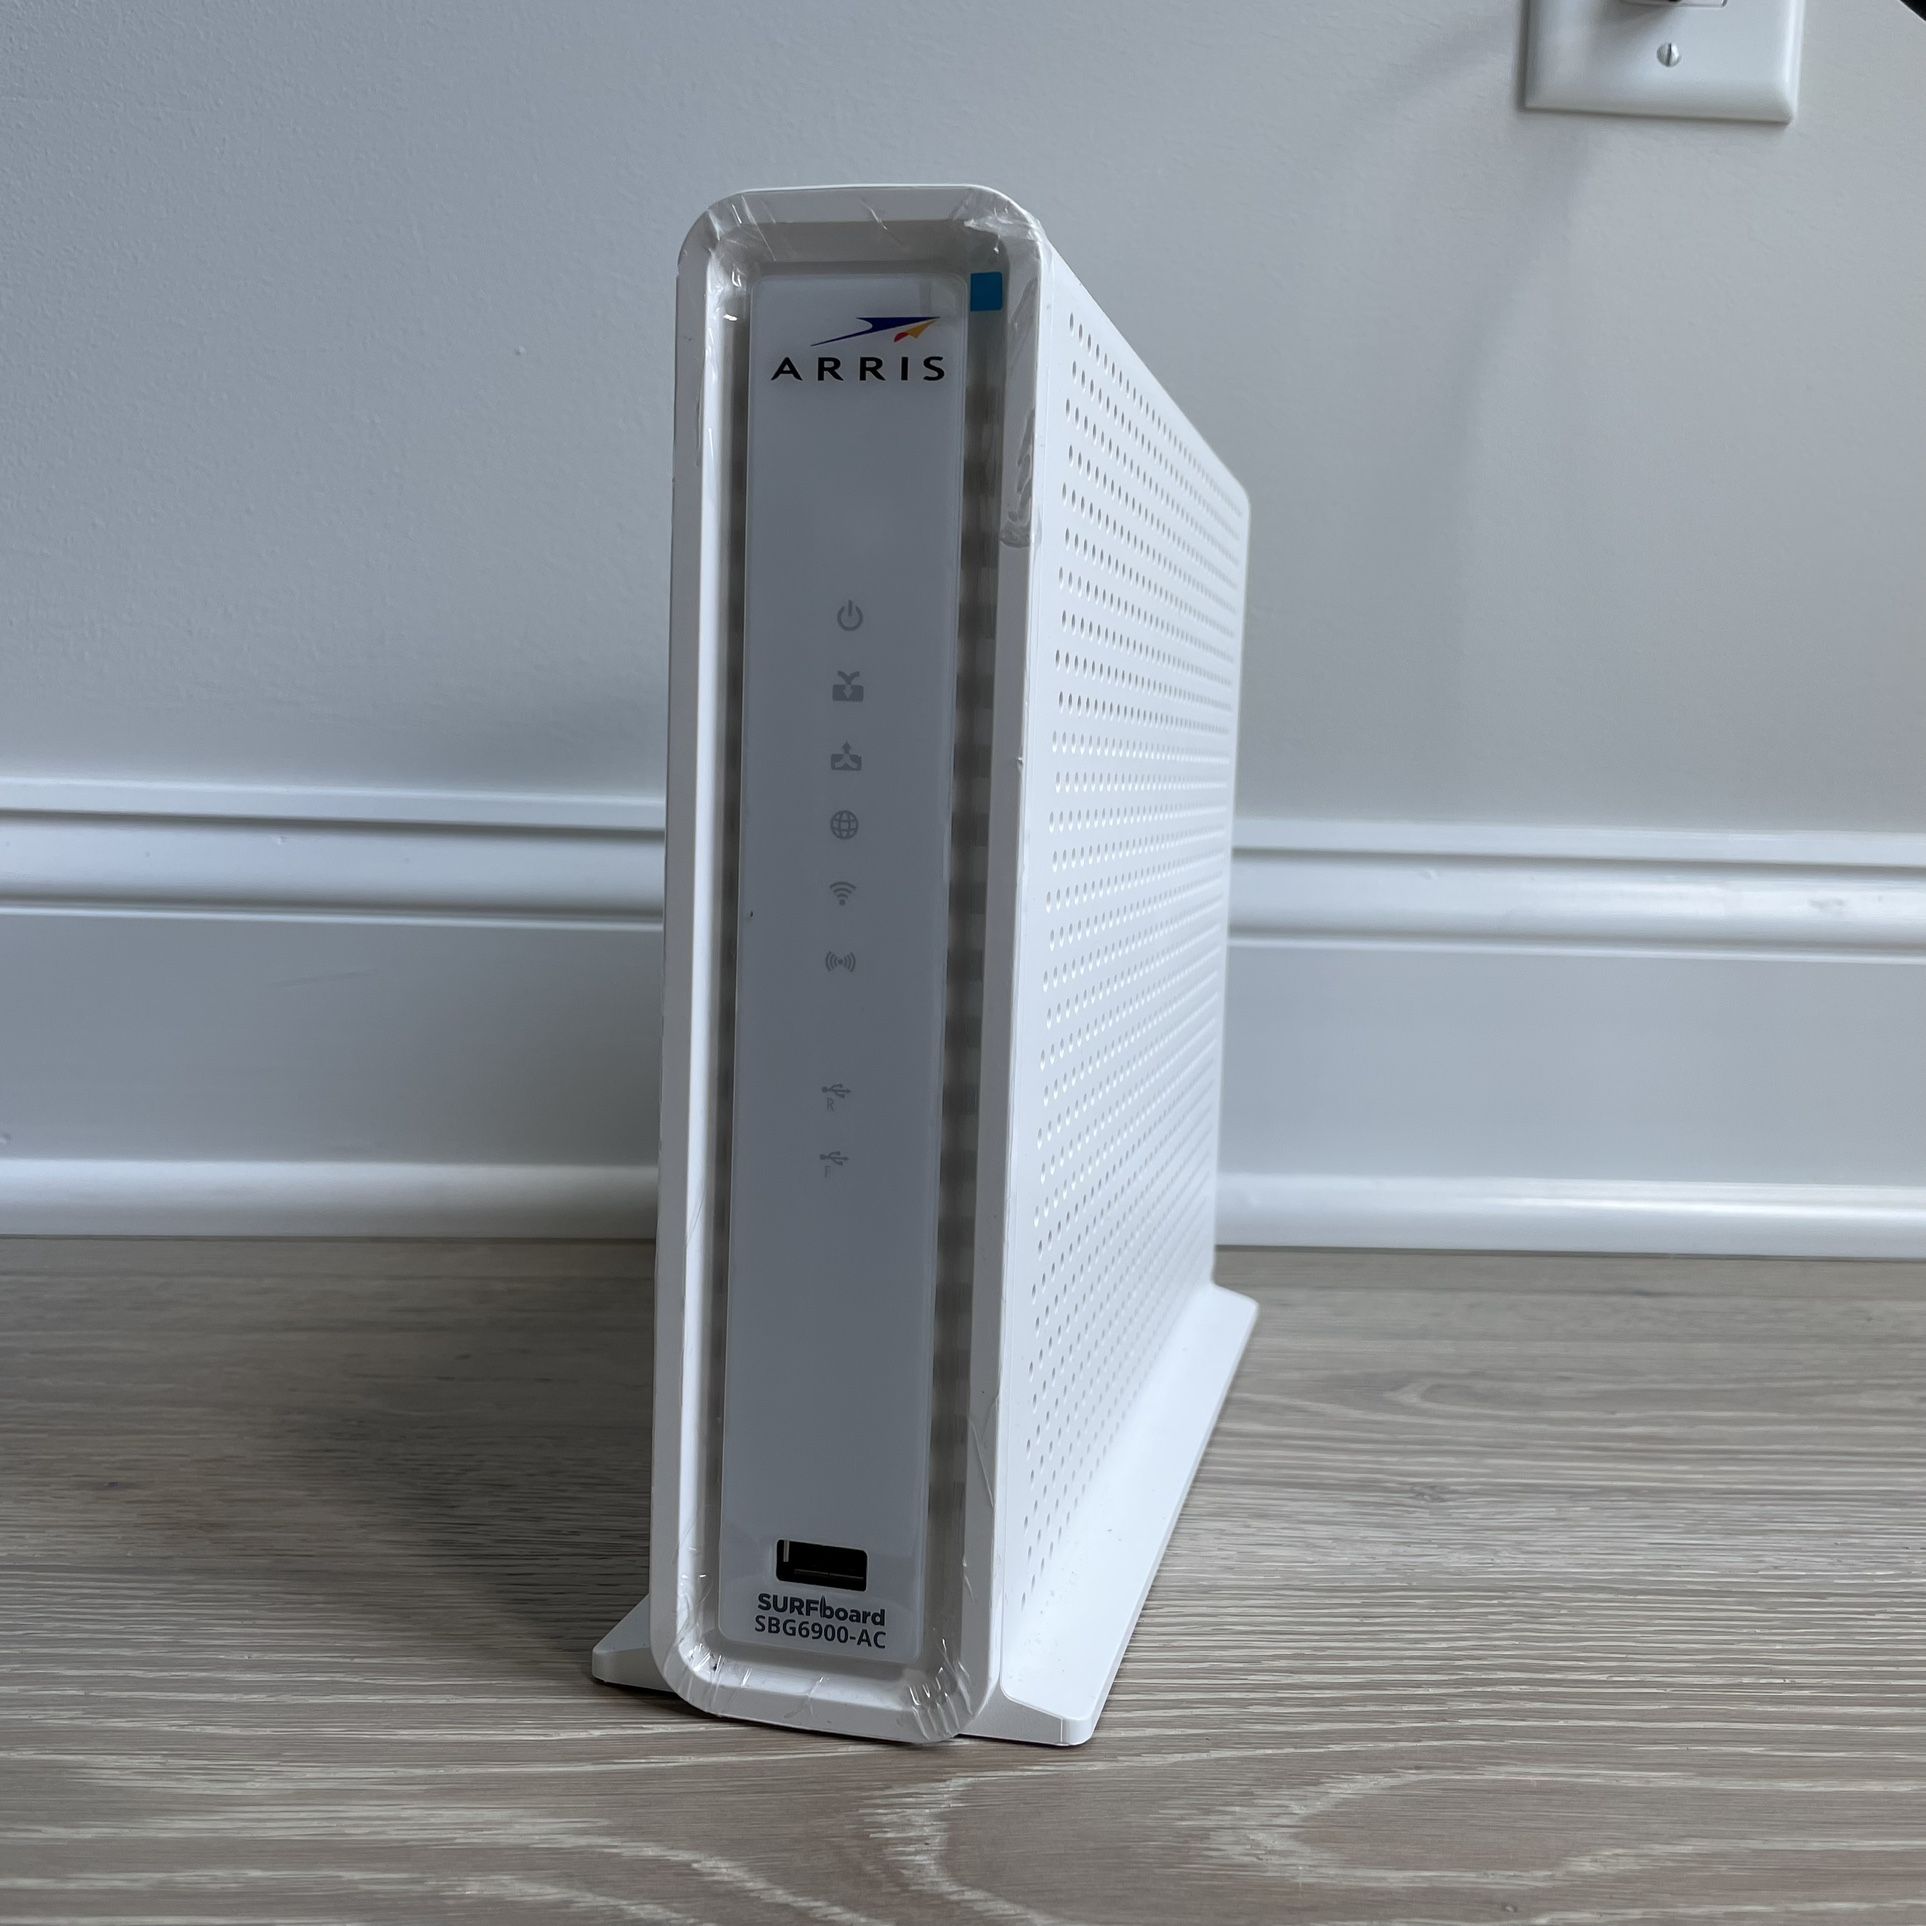 ARRIS SBG6900-AC Modem And Router